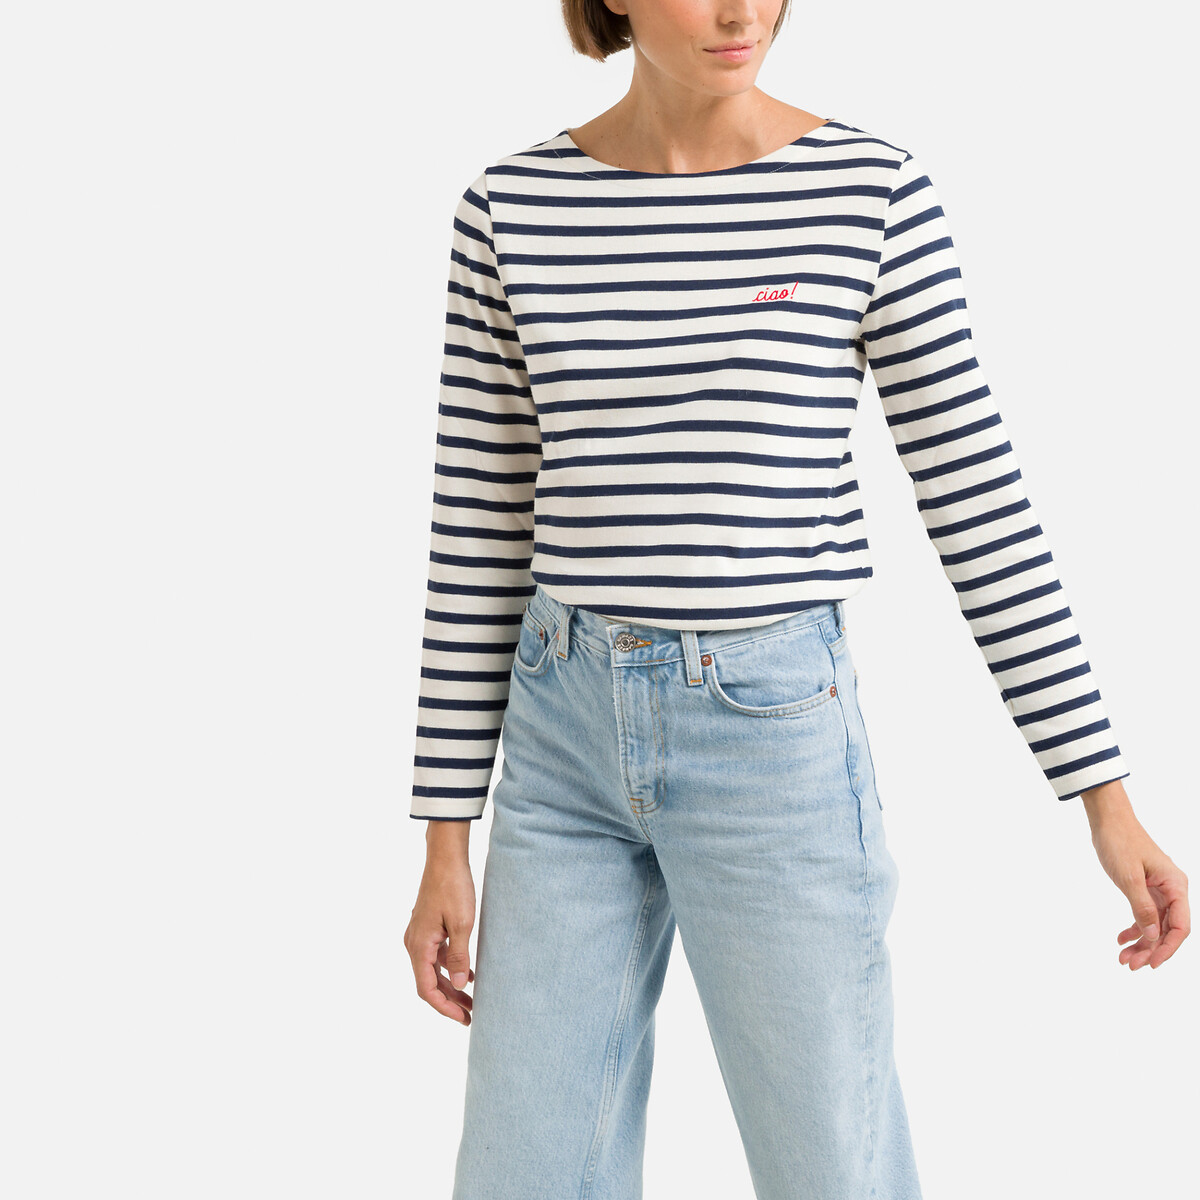 Colombier Breton Striped T-Shirt in Organic Cotton with Ciao Embroidery